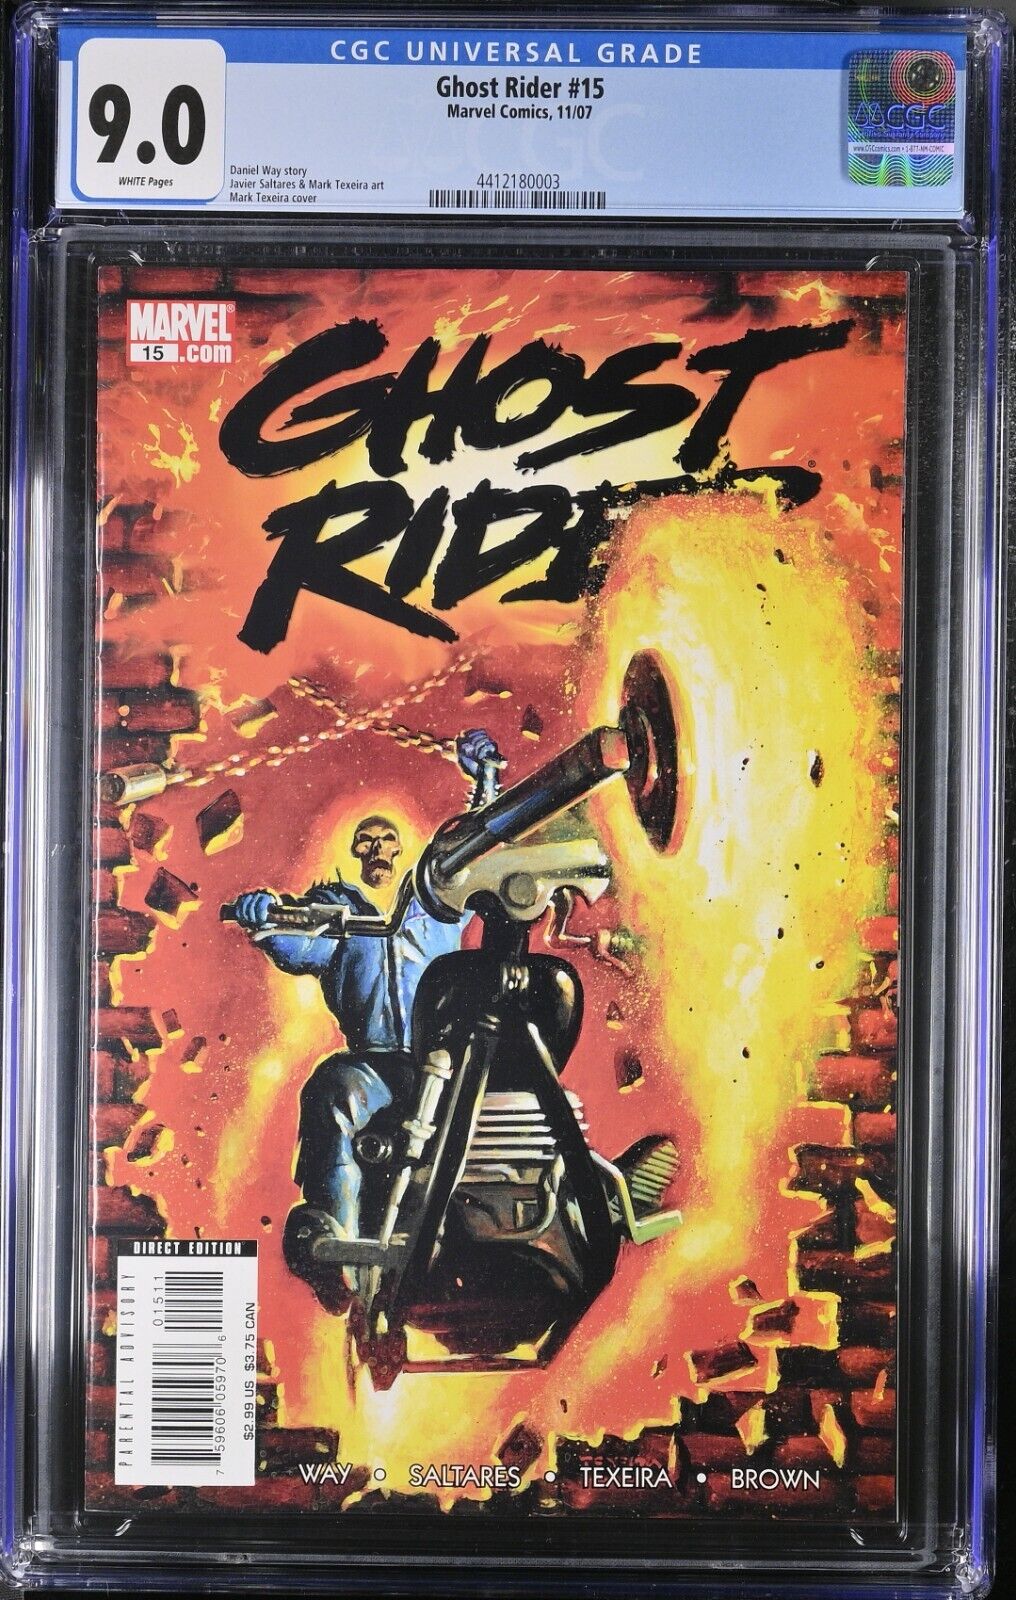 Ghost Rider #15 2007 [Marvel] Mark Texeira Cockling Cover 9.0 CGC